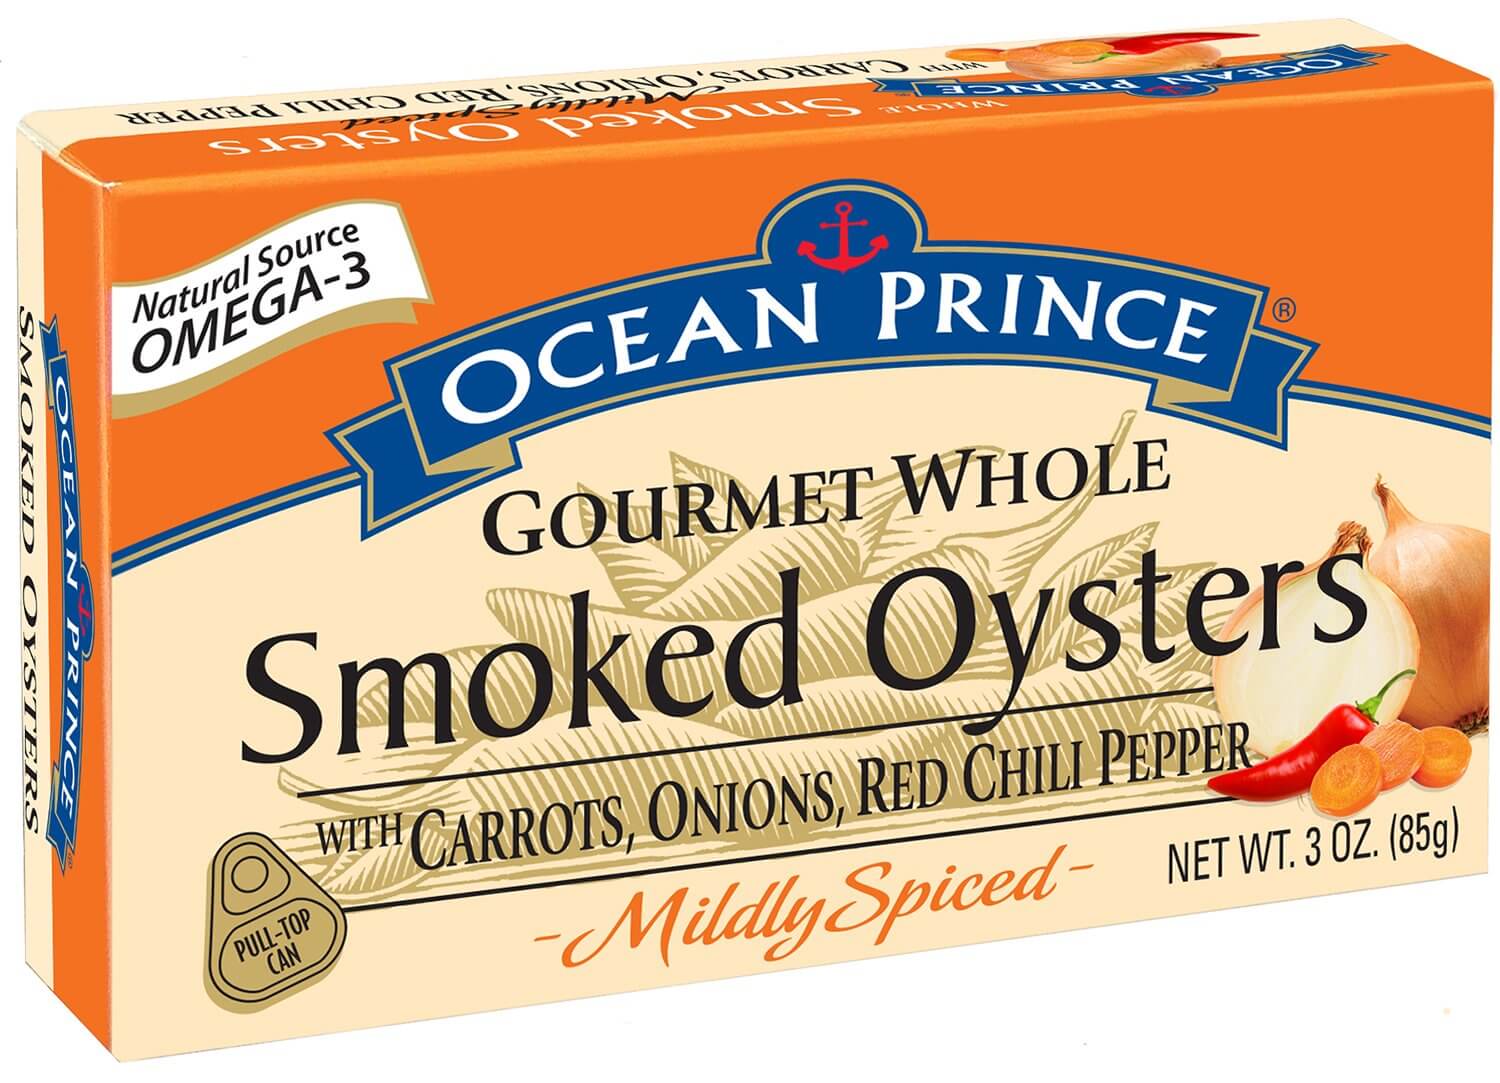 Ocean Prince Gourmet Whole Oysters with Carrots